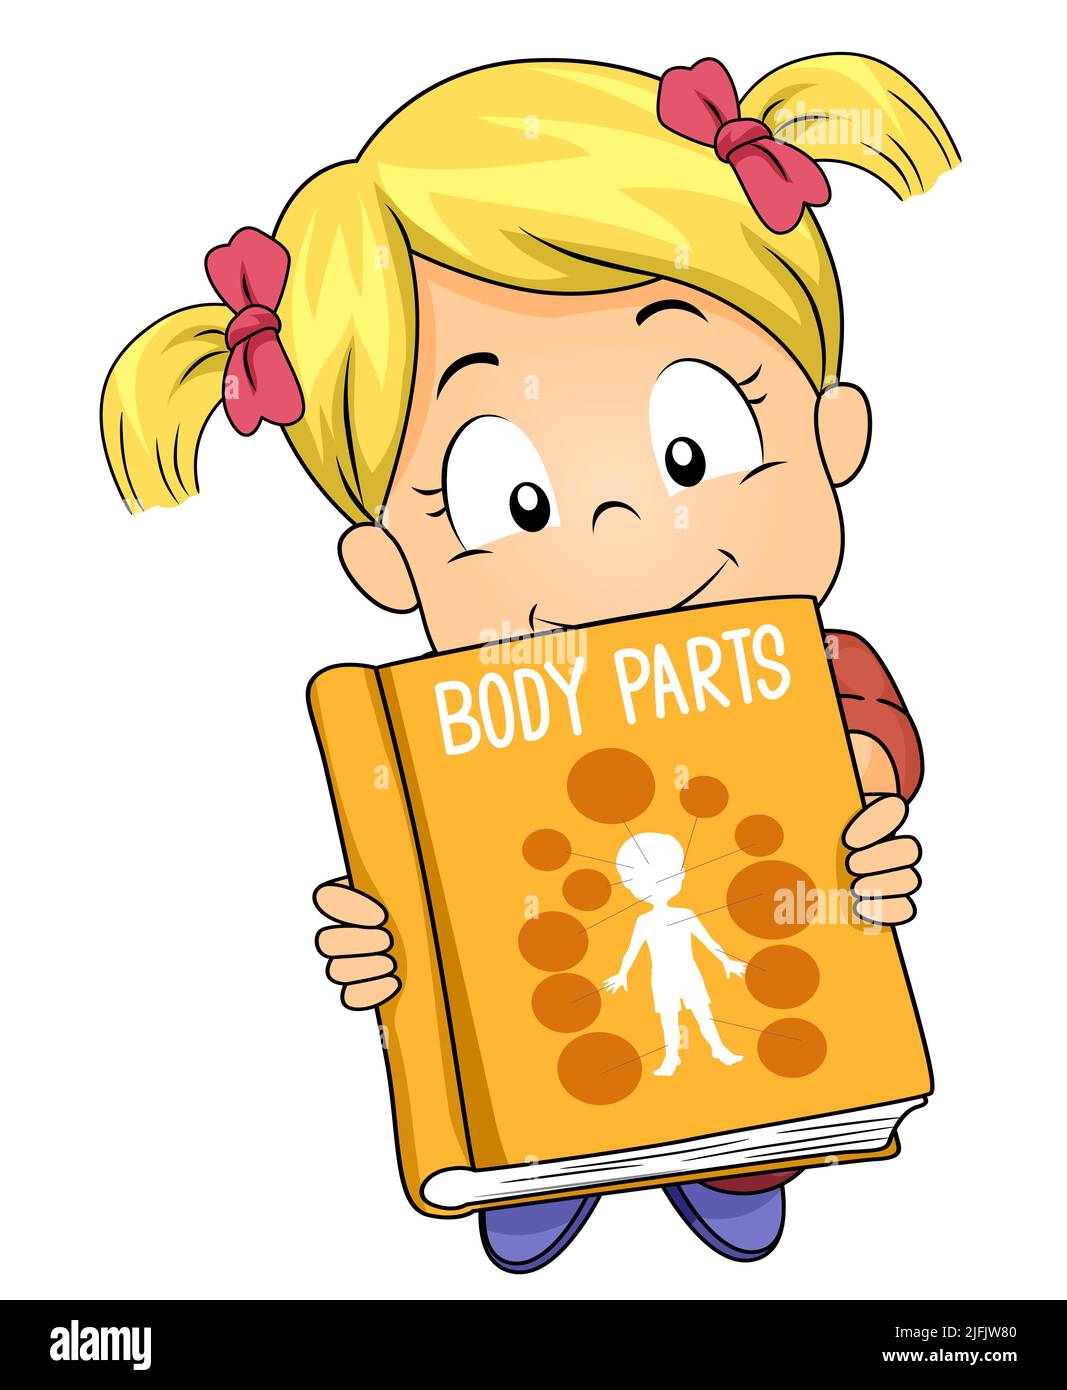 Illustration of Kid Girl Student Holding and Showing a Book About Body Parts Stock Photo